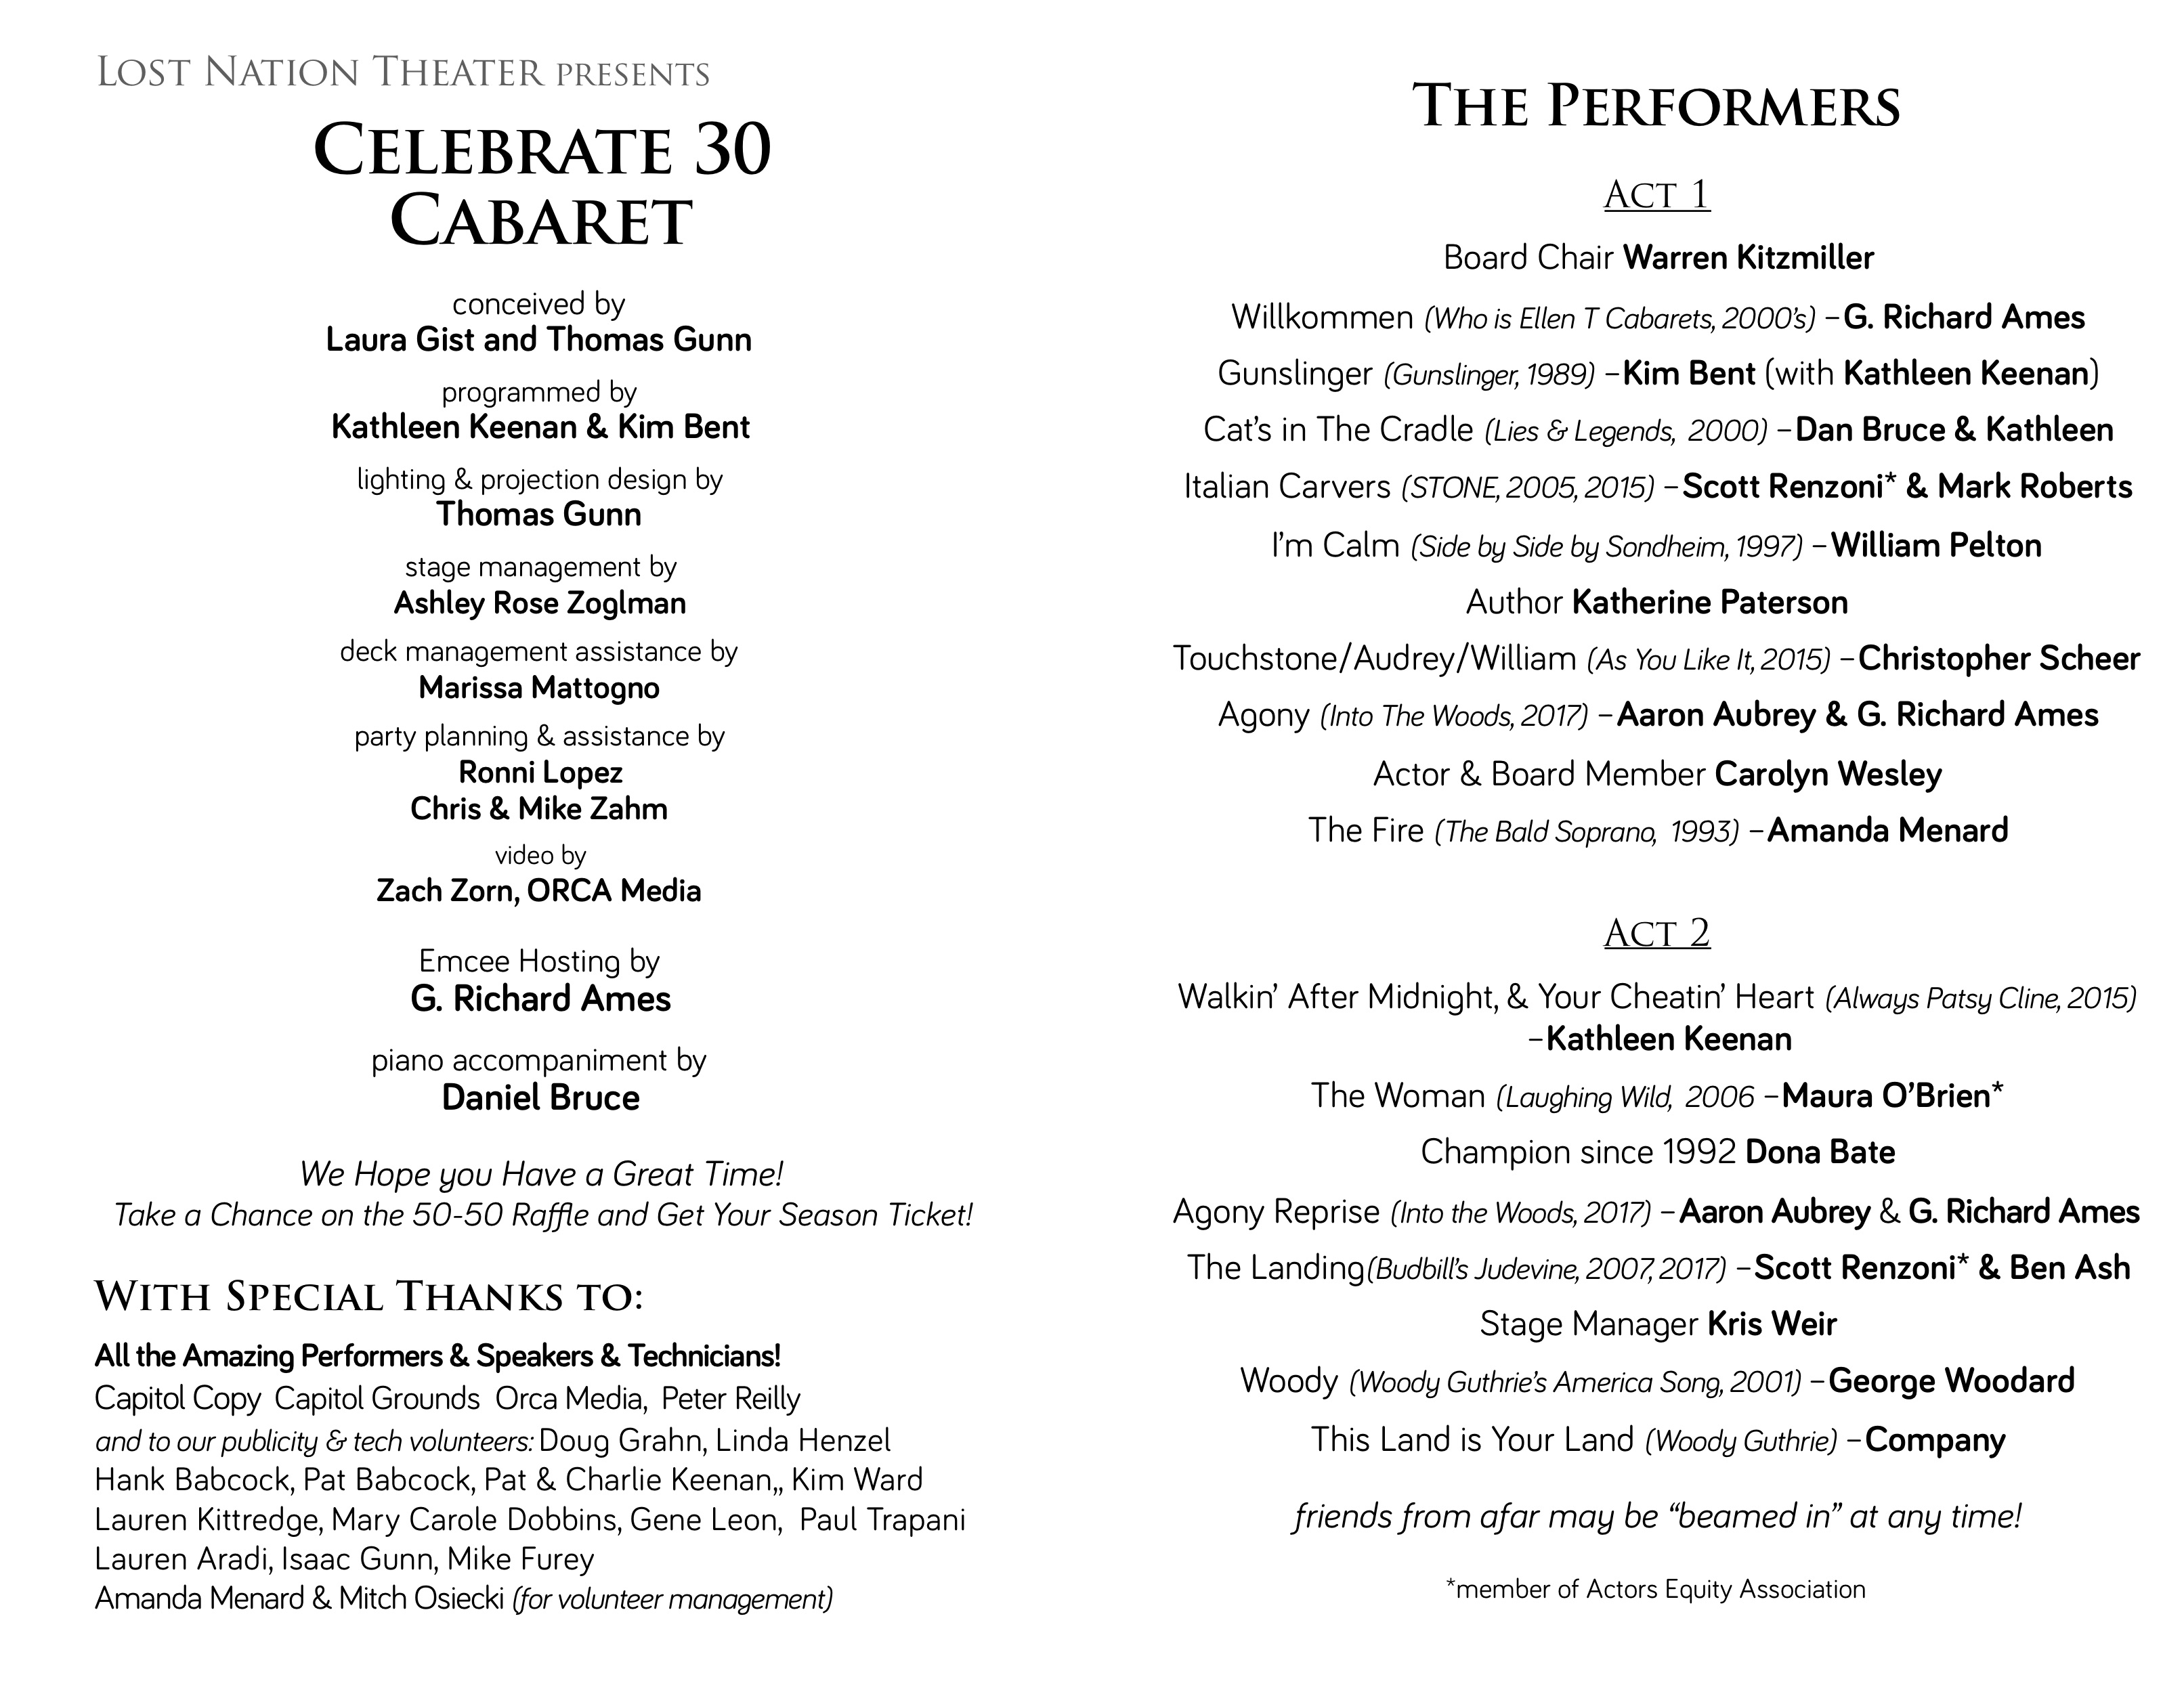 playbill & performer credits from our celebrate 30 cabaret 